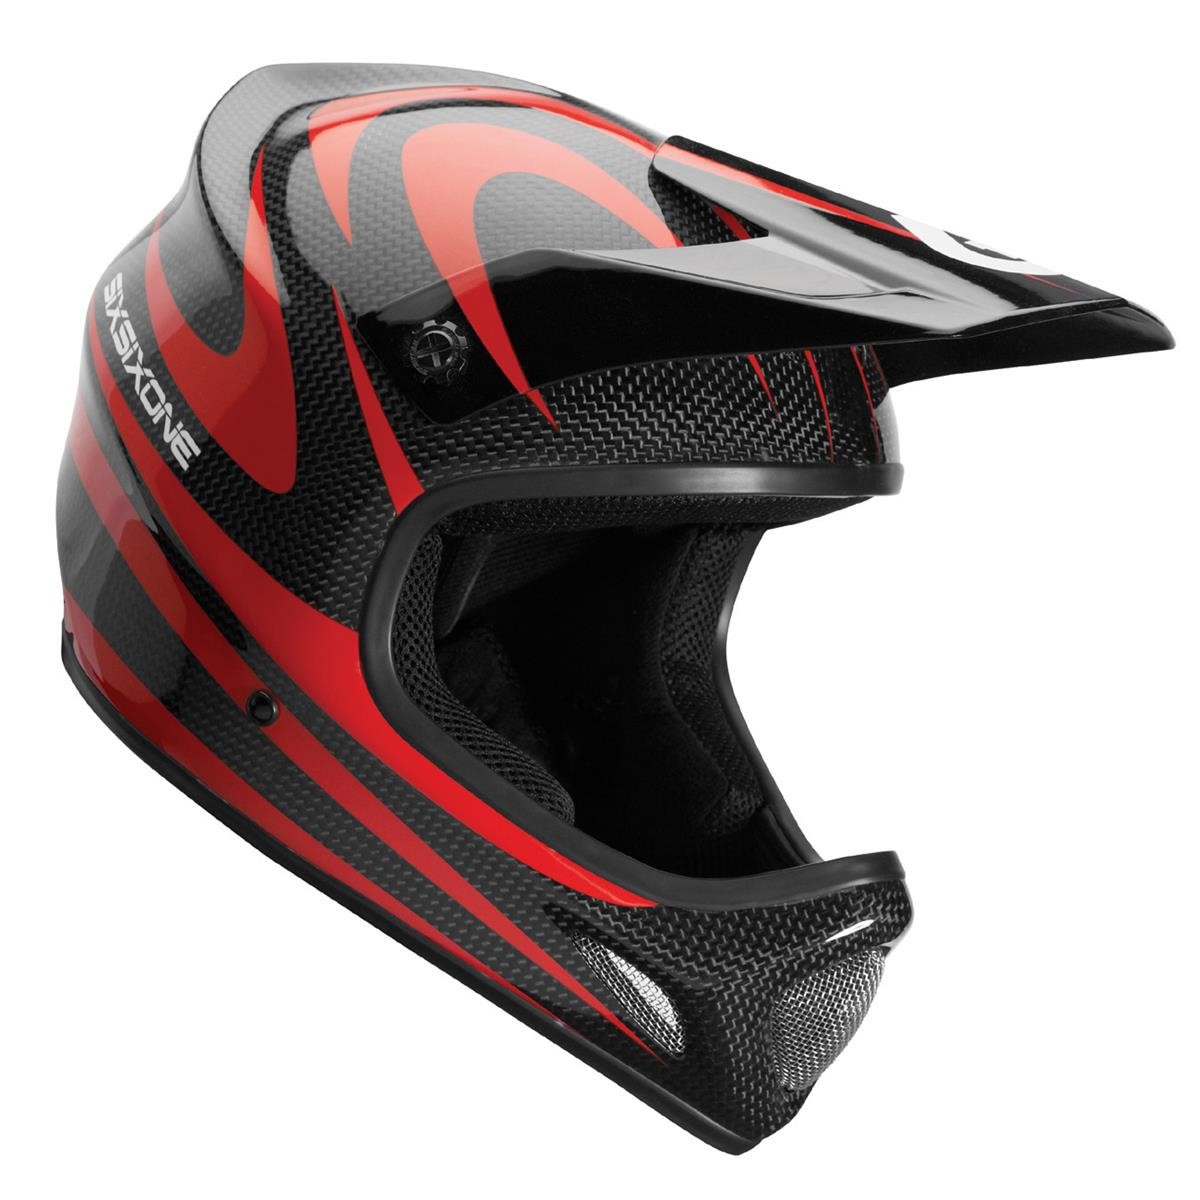 SixSixOne Casque VTT Downhill 661 Evo Carbon Camber Red